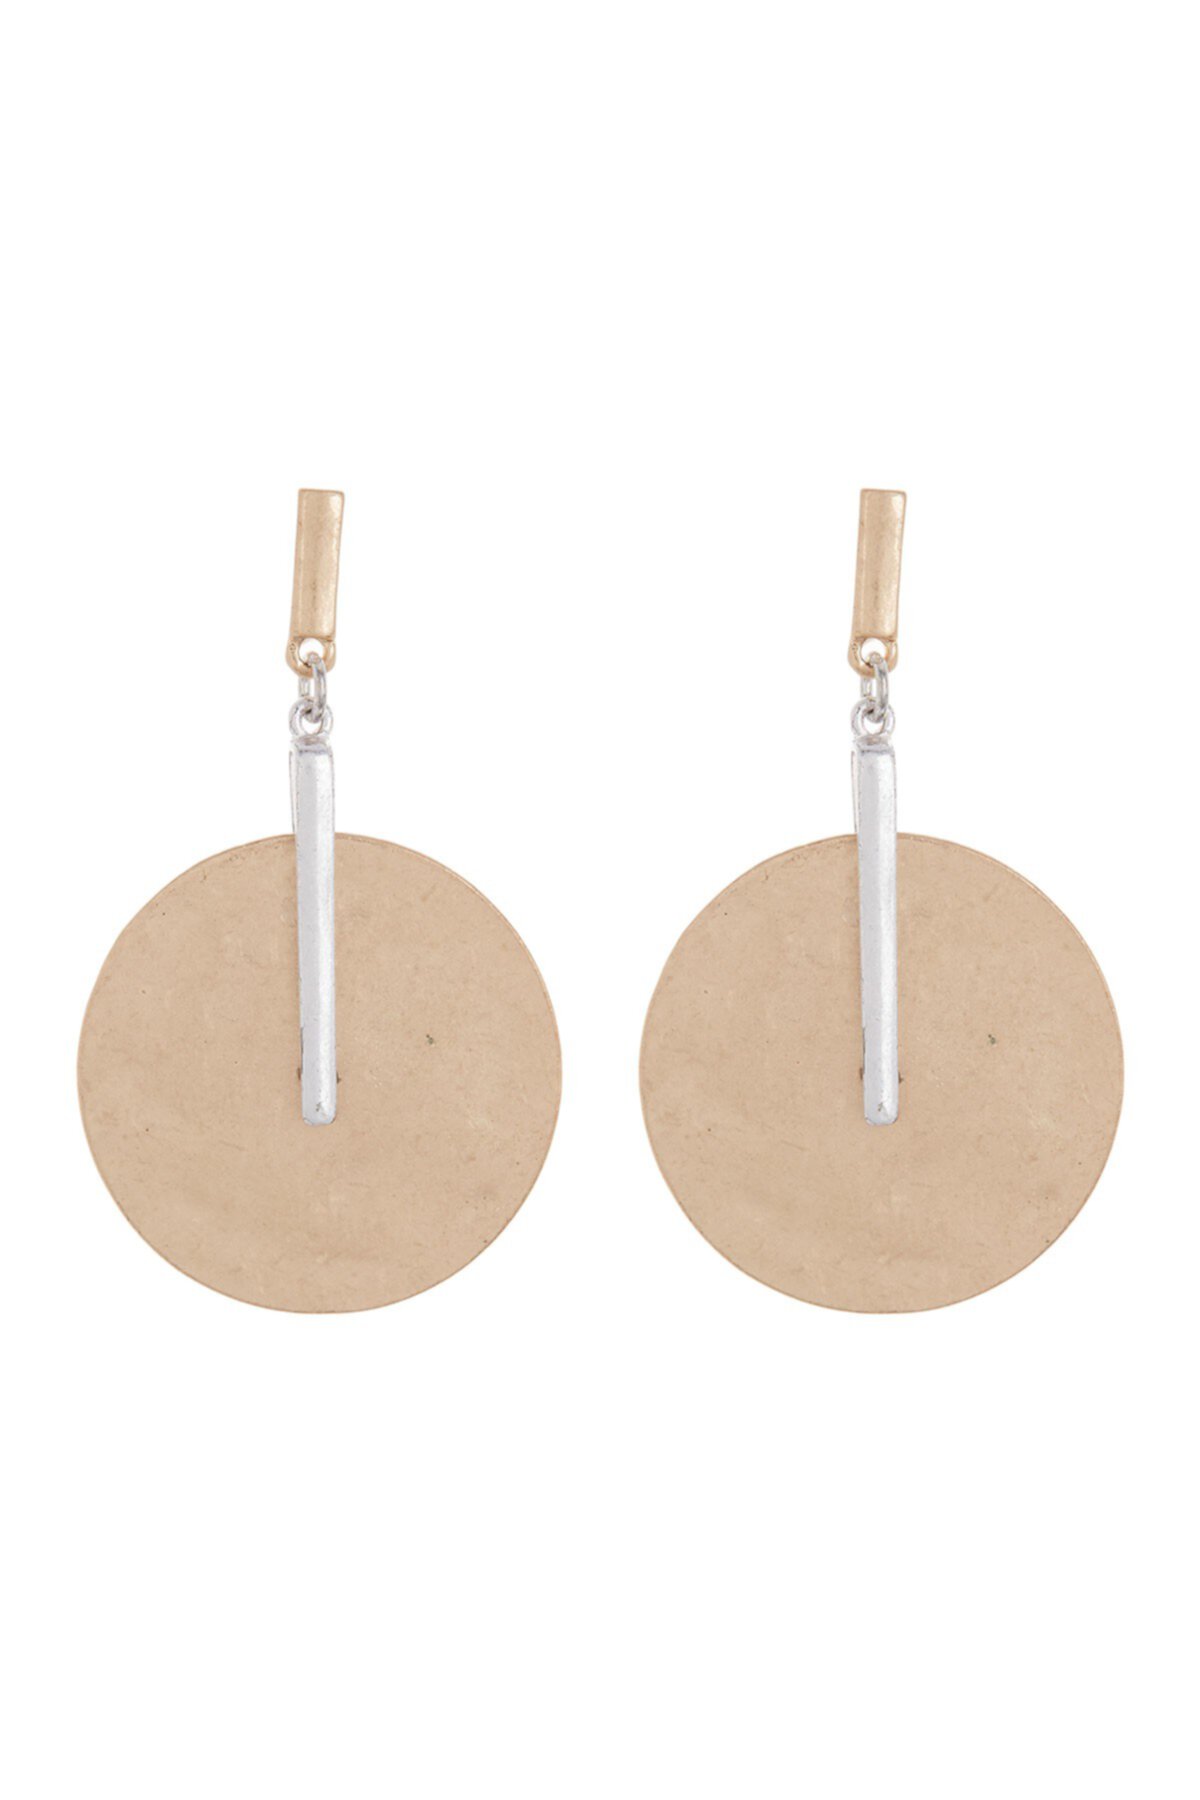 Gold Silver Bar Circle Statement Earrings AREA STARS